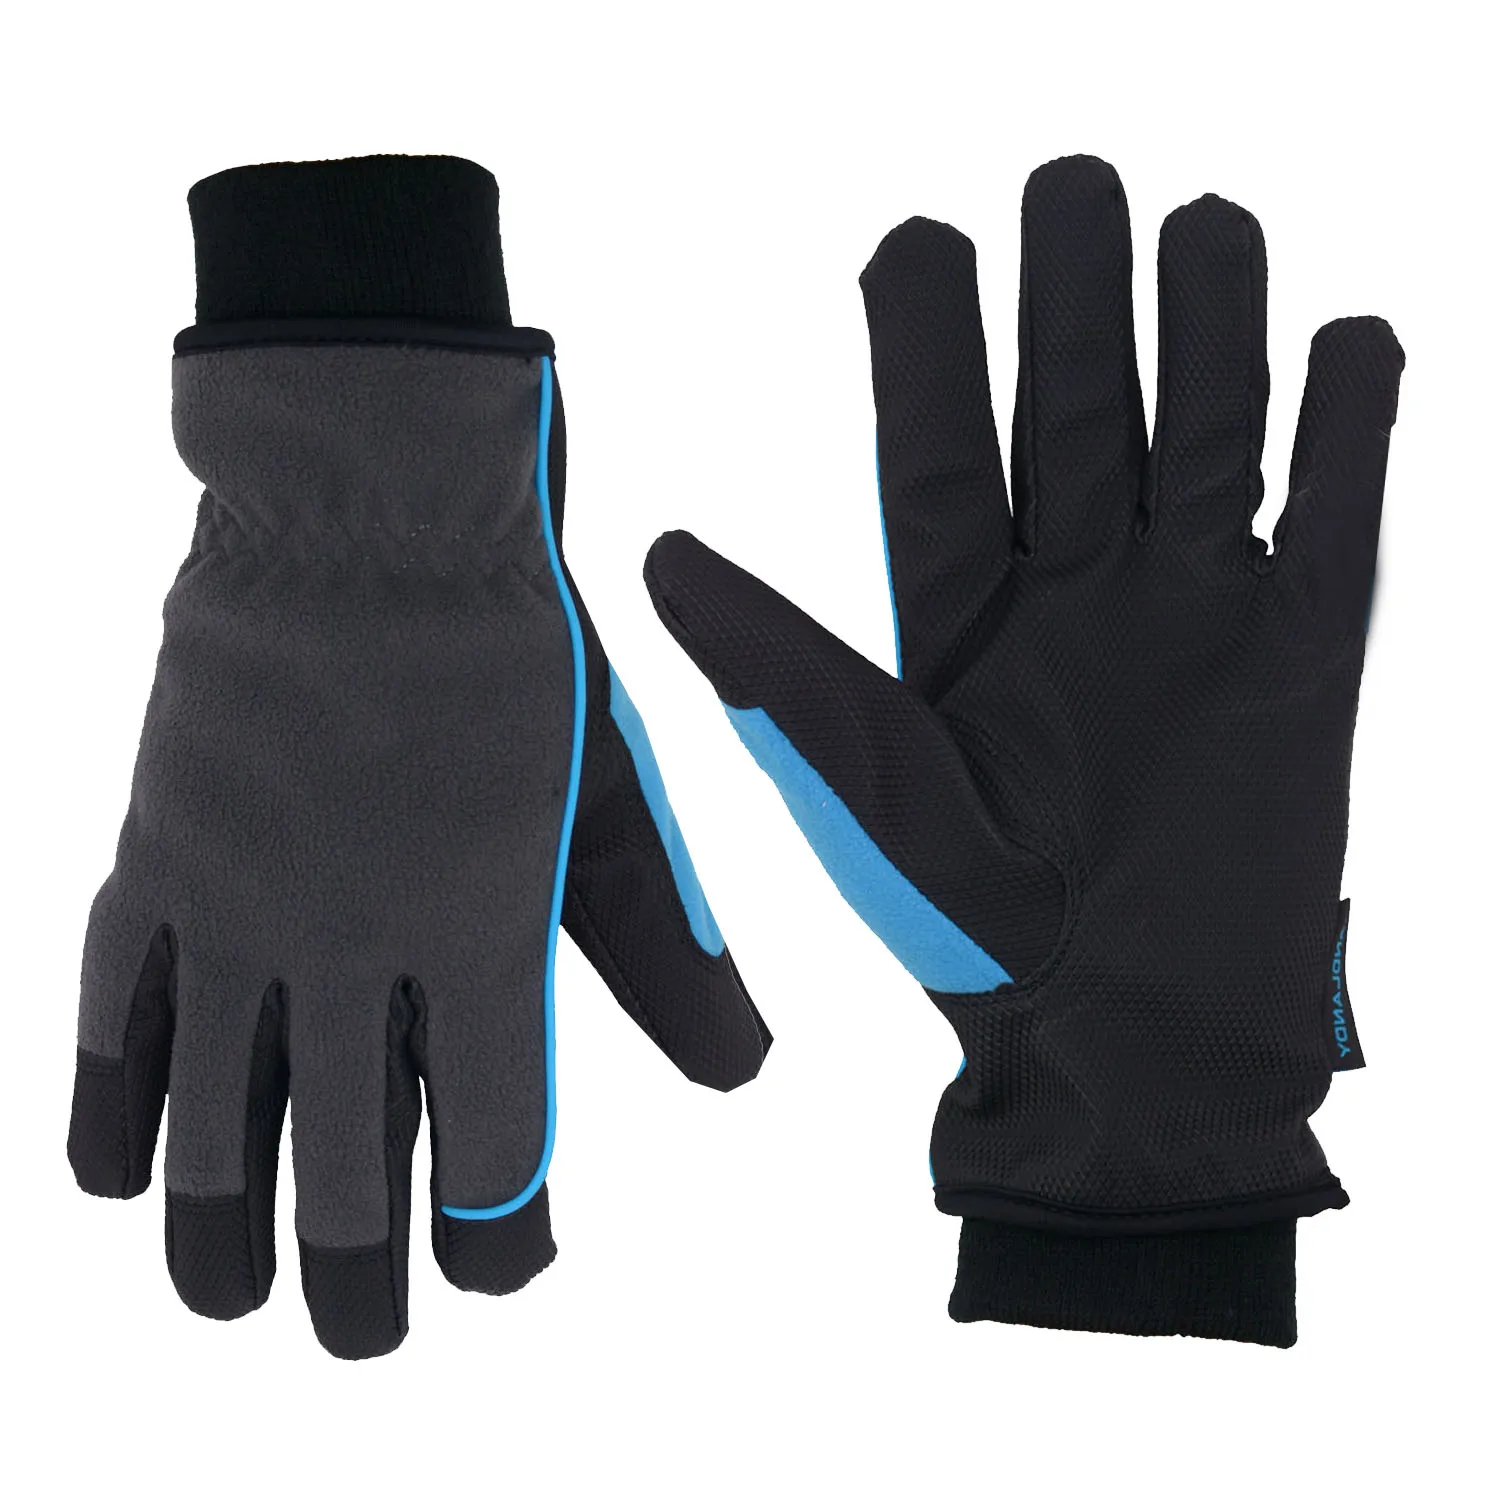 

HANDLANDY Thermal Cold Weather Sport Work Ski Waterproof Warm Heated Touch Screen Men Winter Gloves For Outdoor, Blue/any customized color